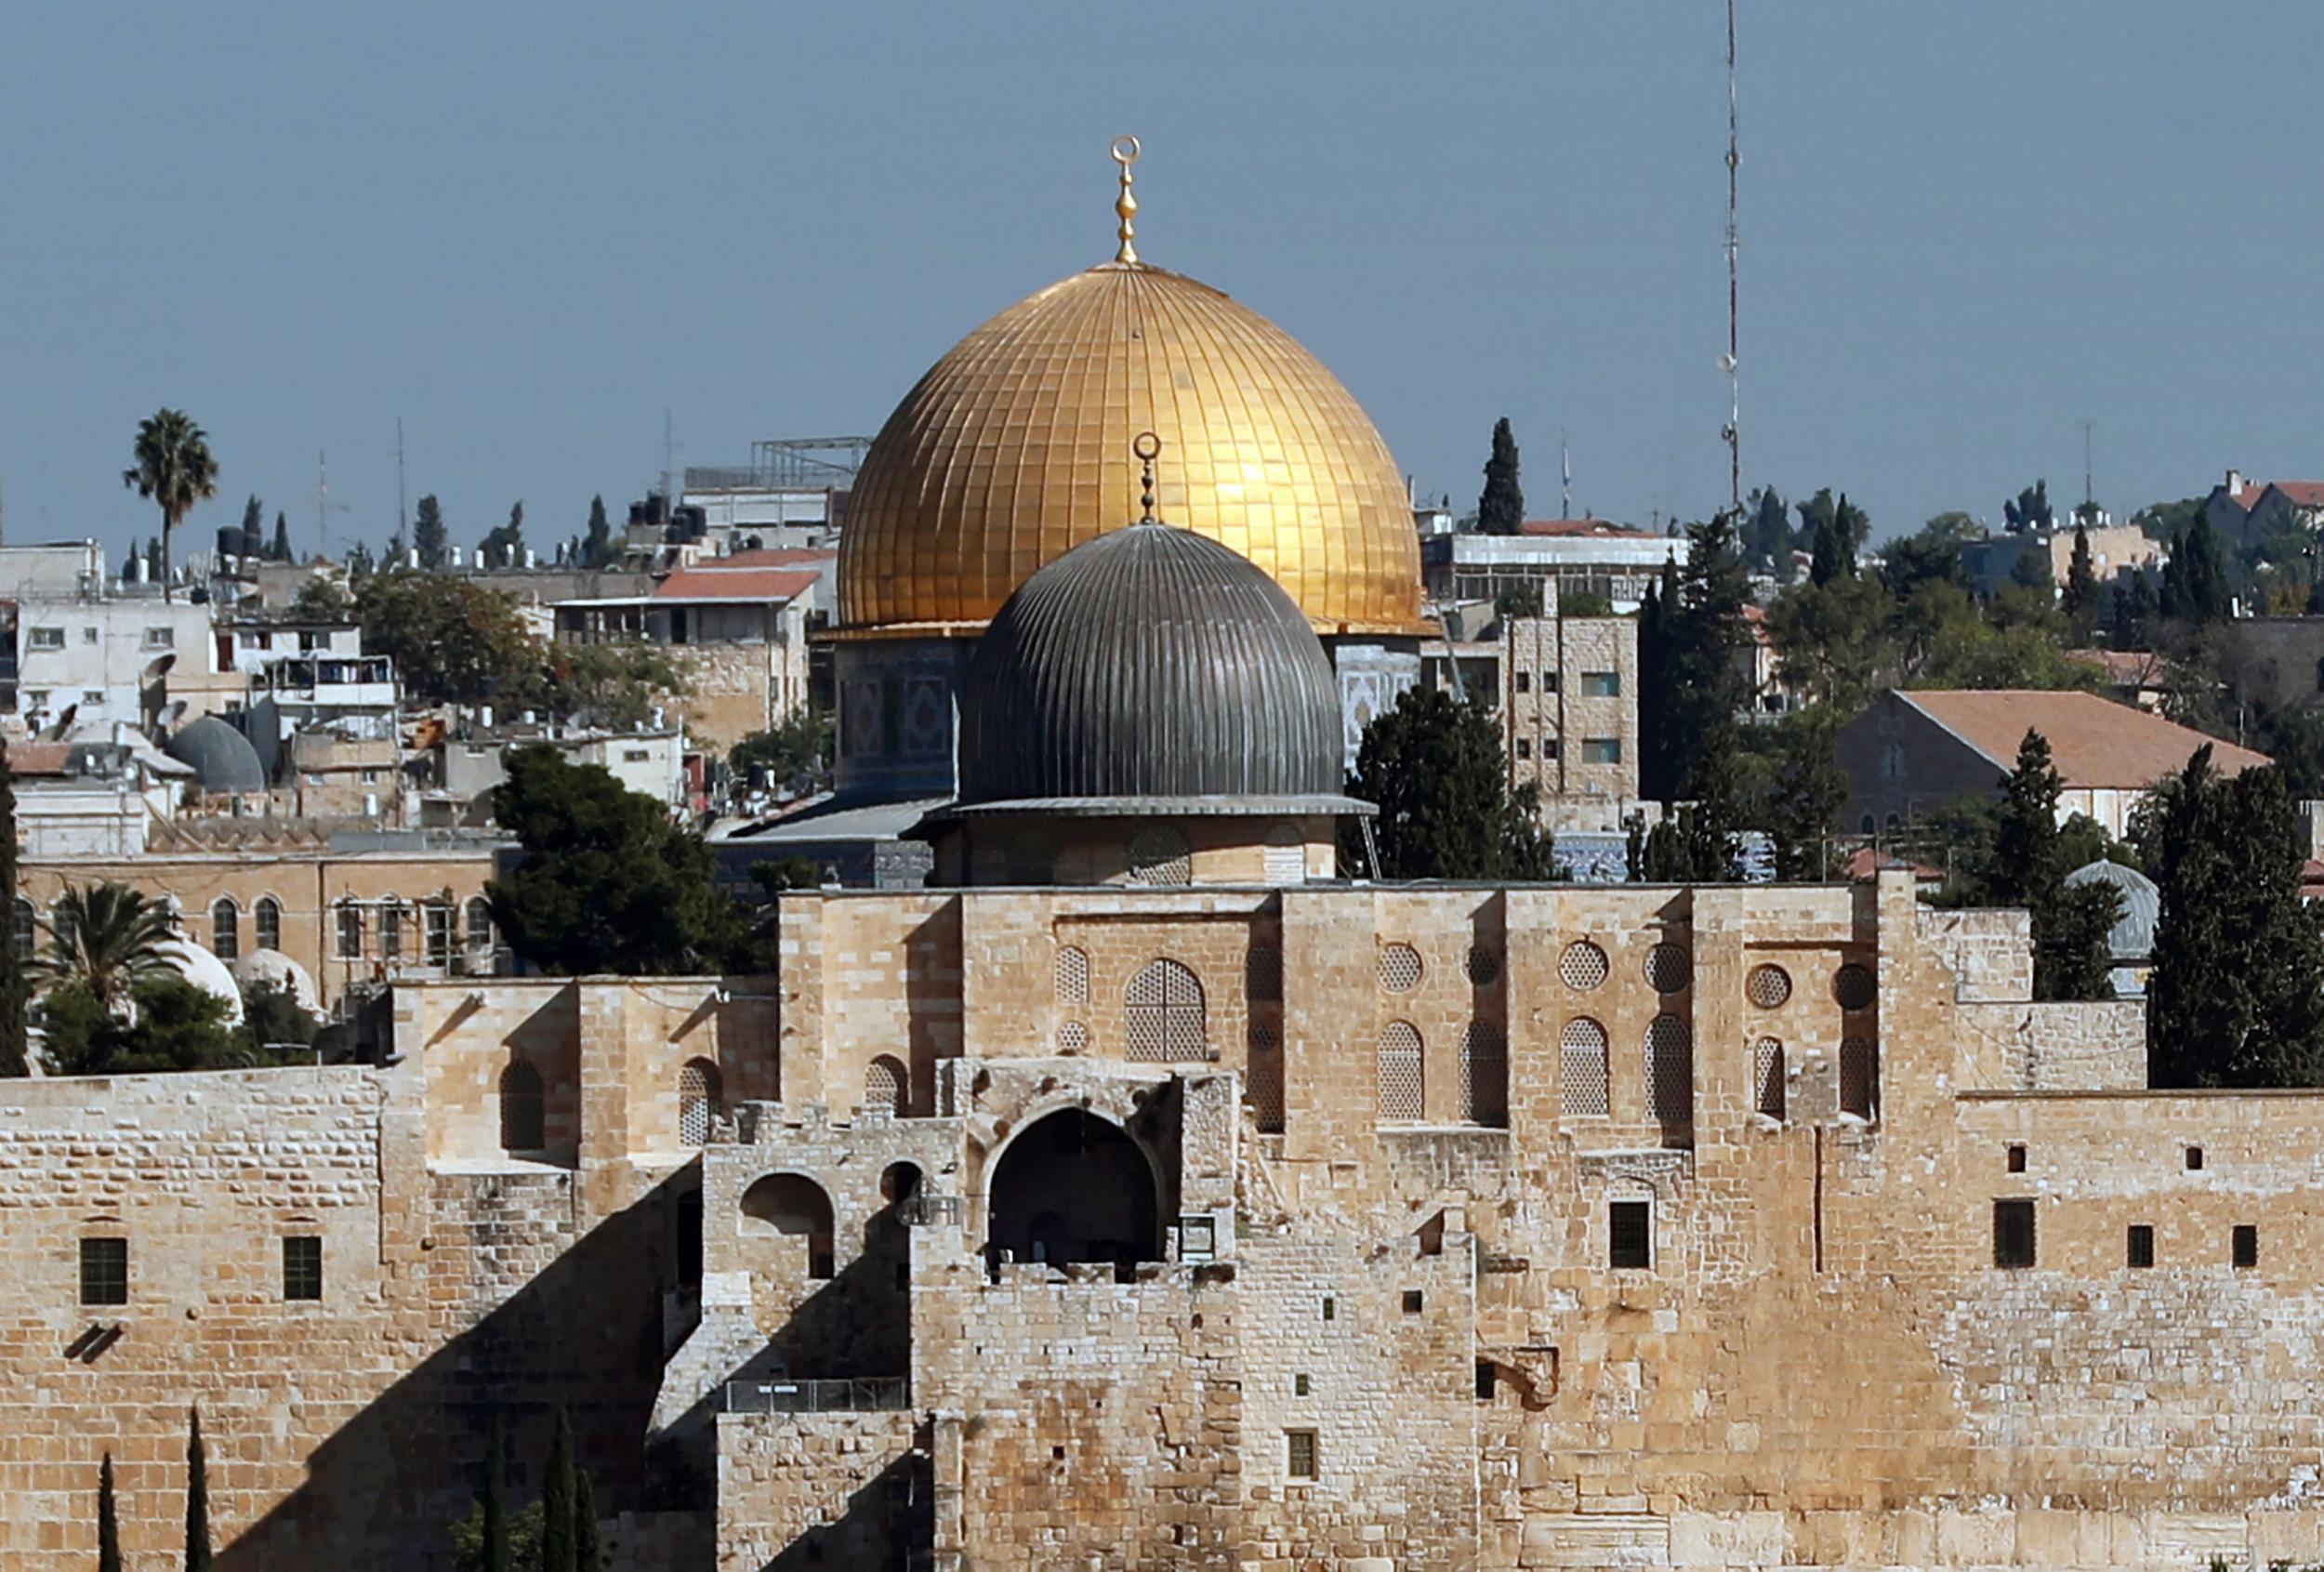 The Old City of Jerusalem, with the Dome of the Rock at the back and the dome of the al-Aqsa mosque in the foreground